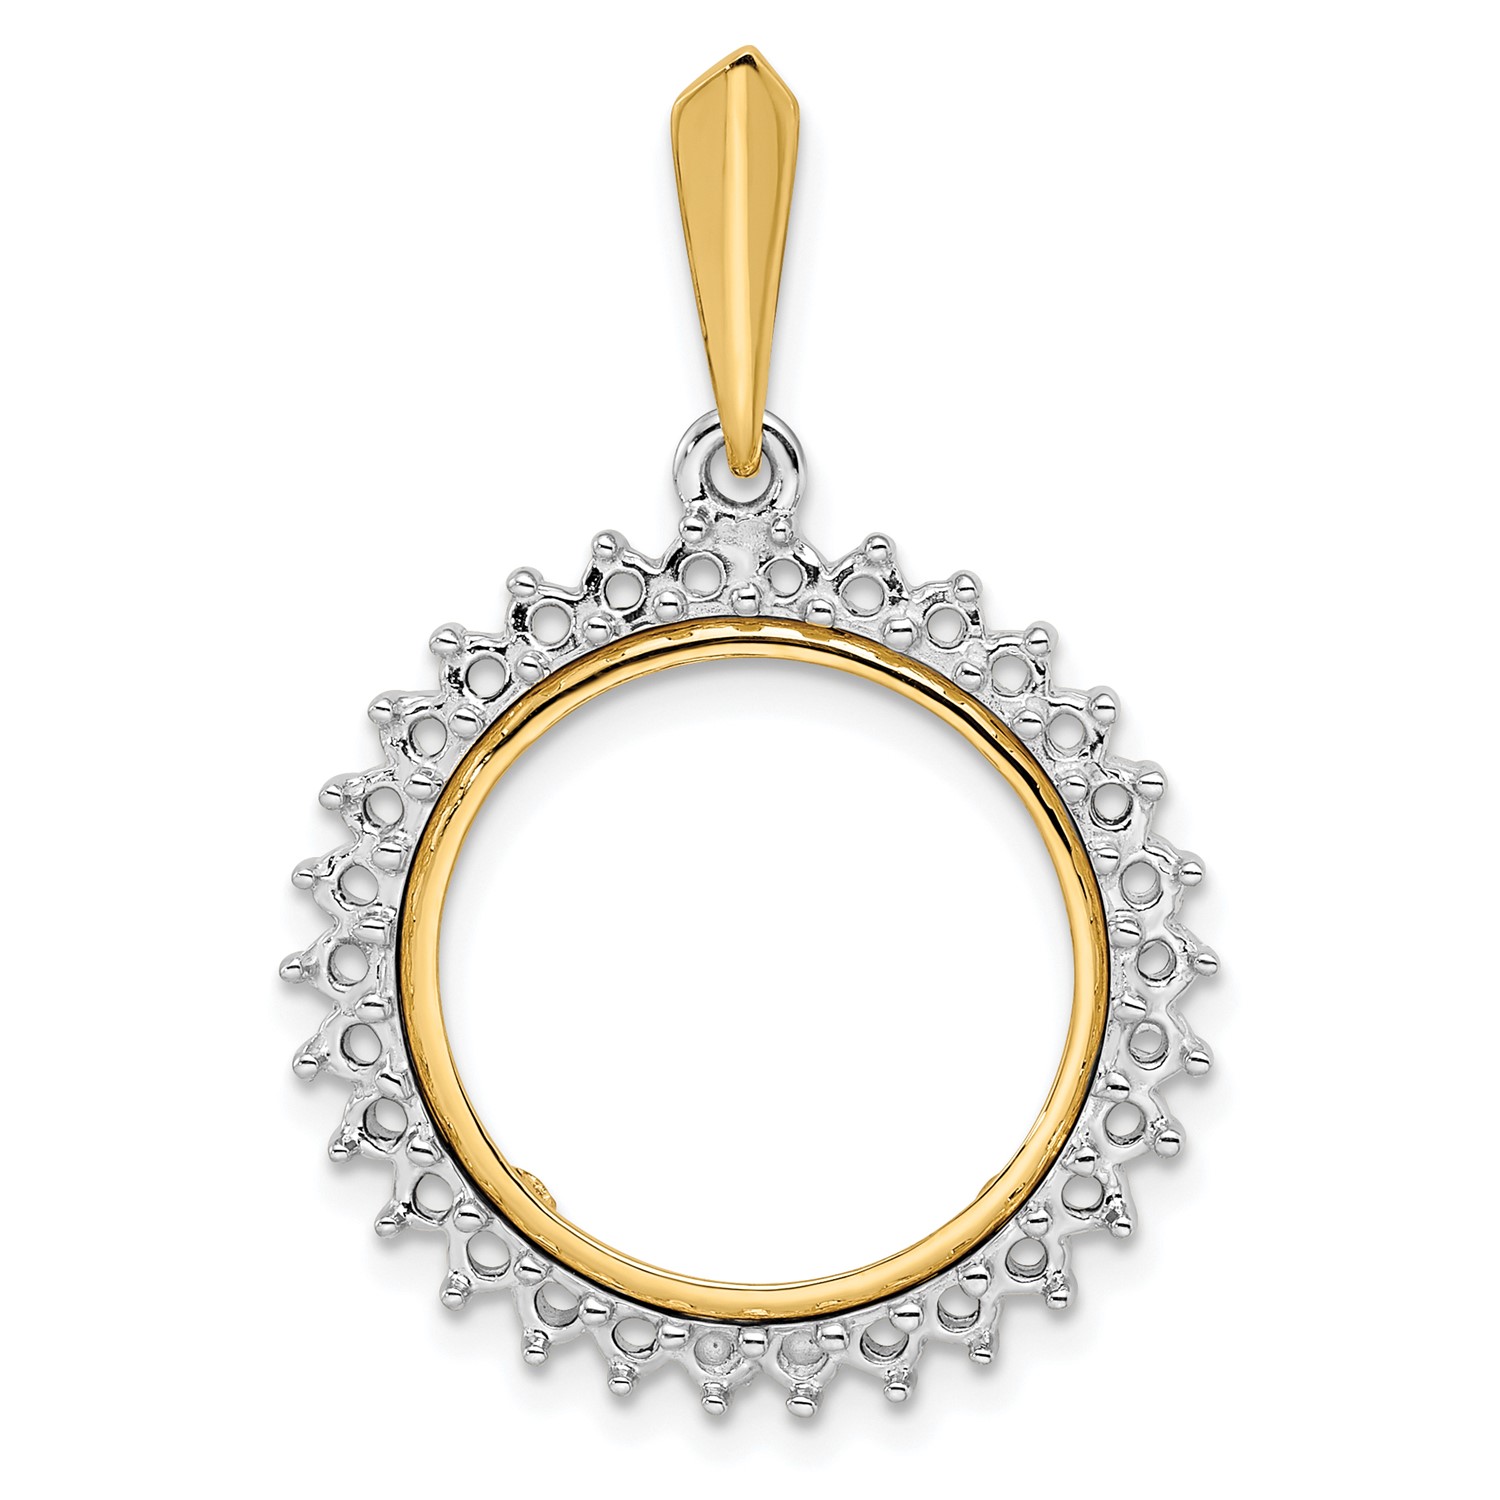 Buy 14K Two-tone Dia 16.5 mm Prong Coin Bezel Pend